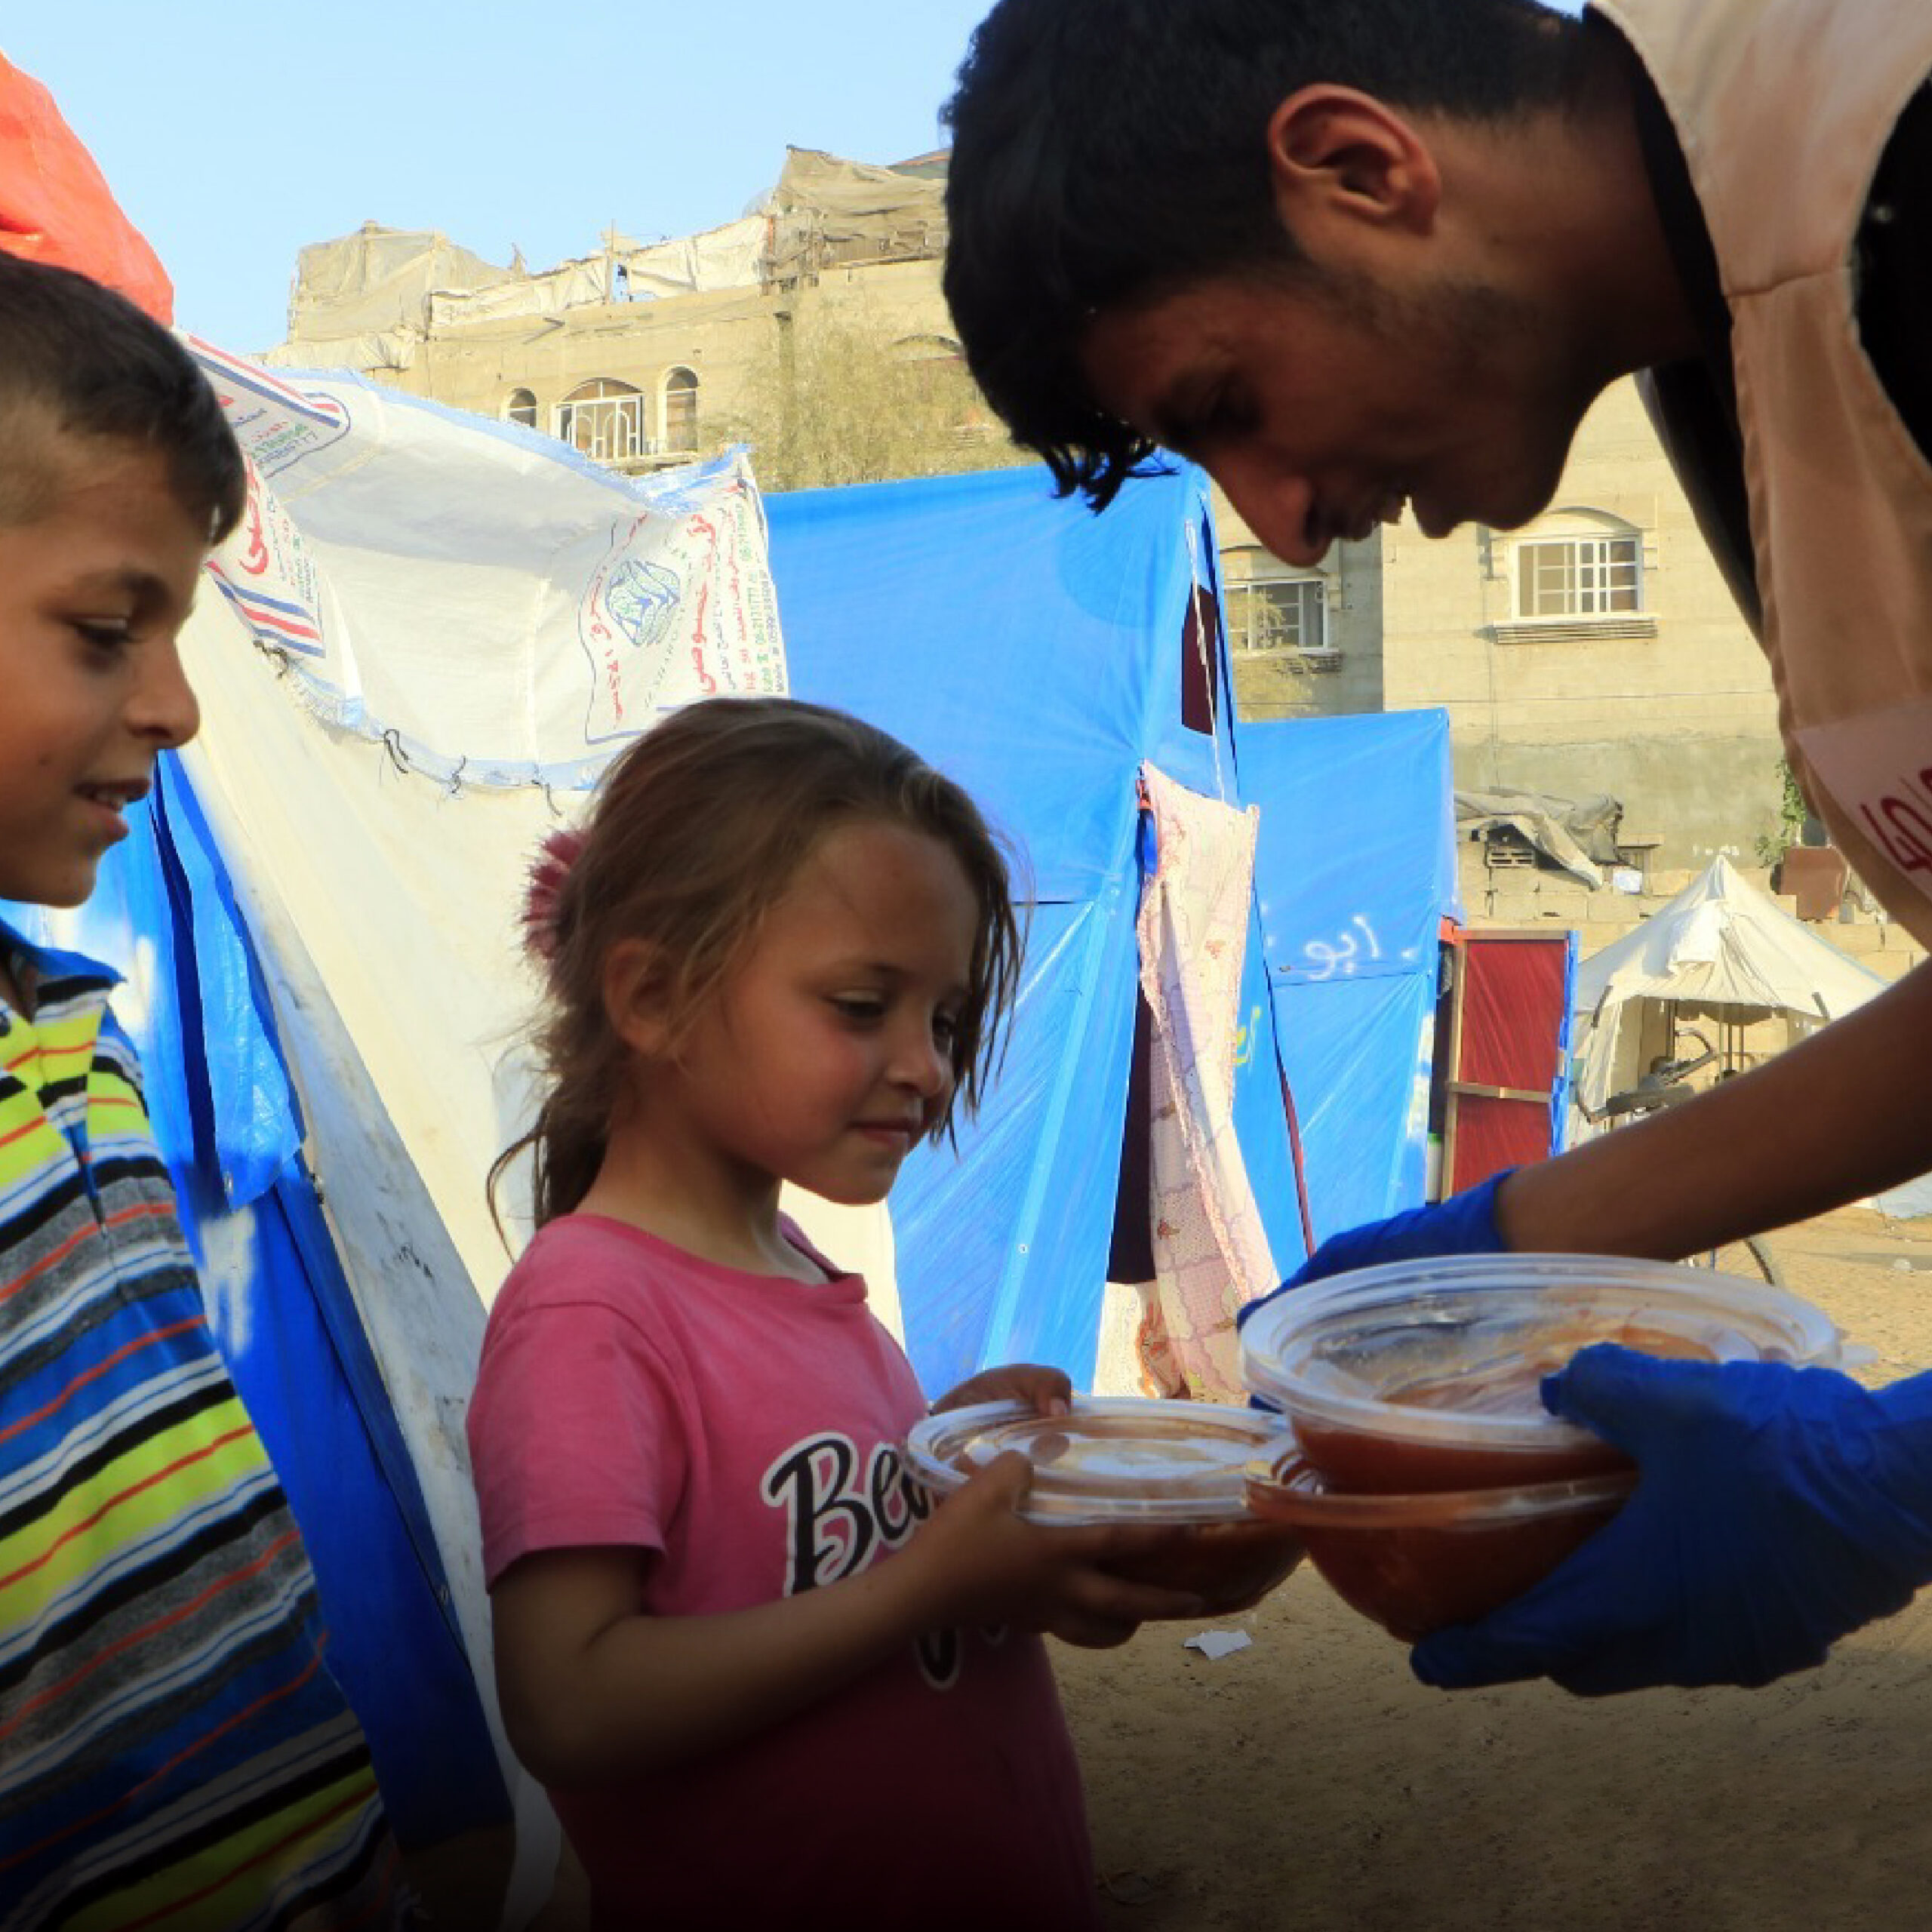 A worker provides a meal to a child.